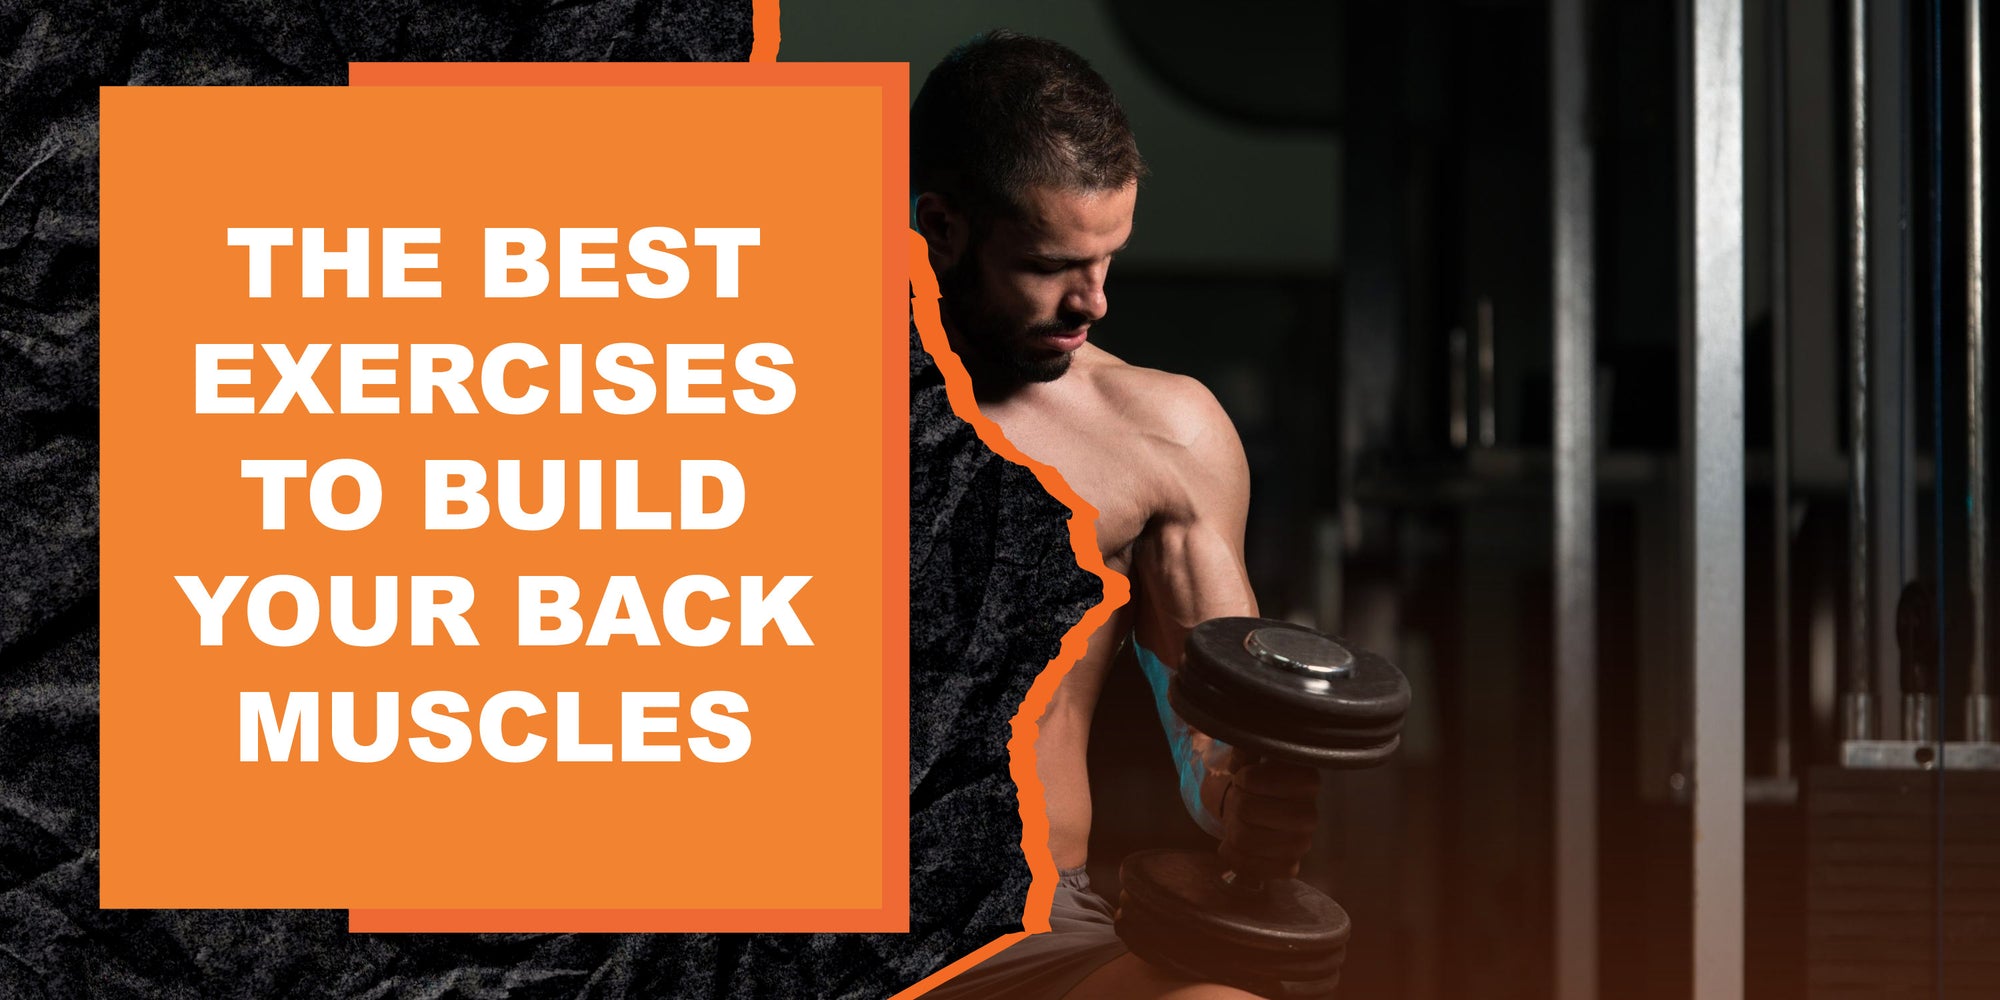 The Best Exercises to Build Your Back Muscles